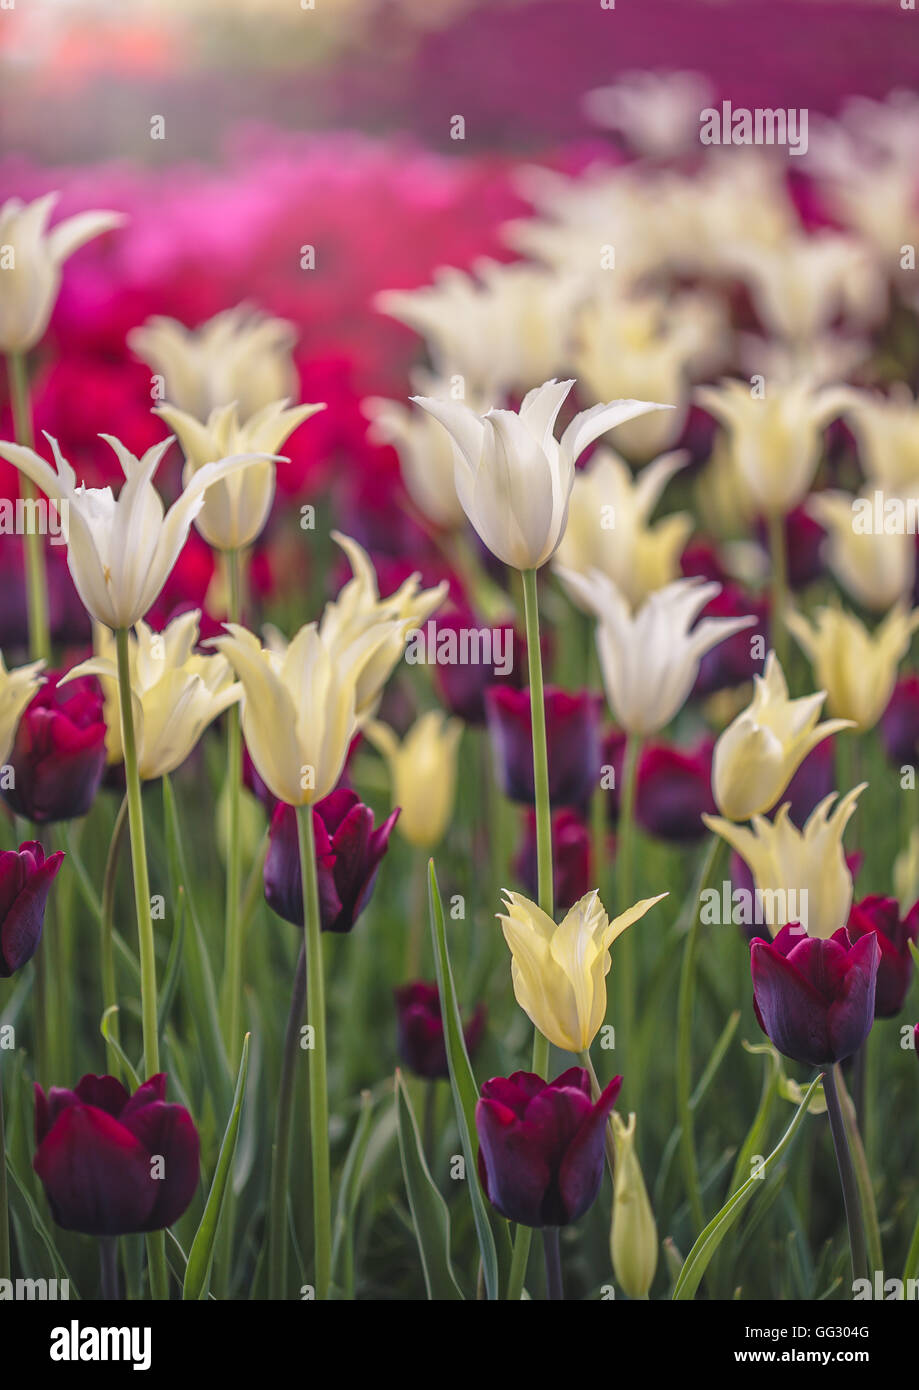 White and violet tulips field close up, single flower in selective focus Stock Photo